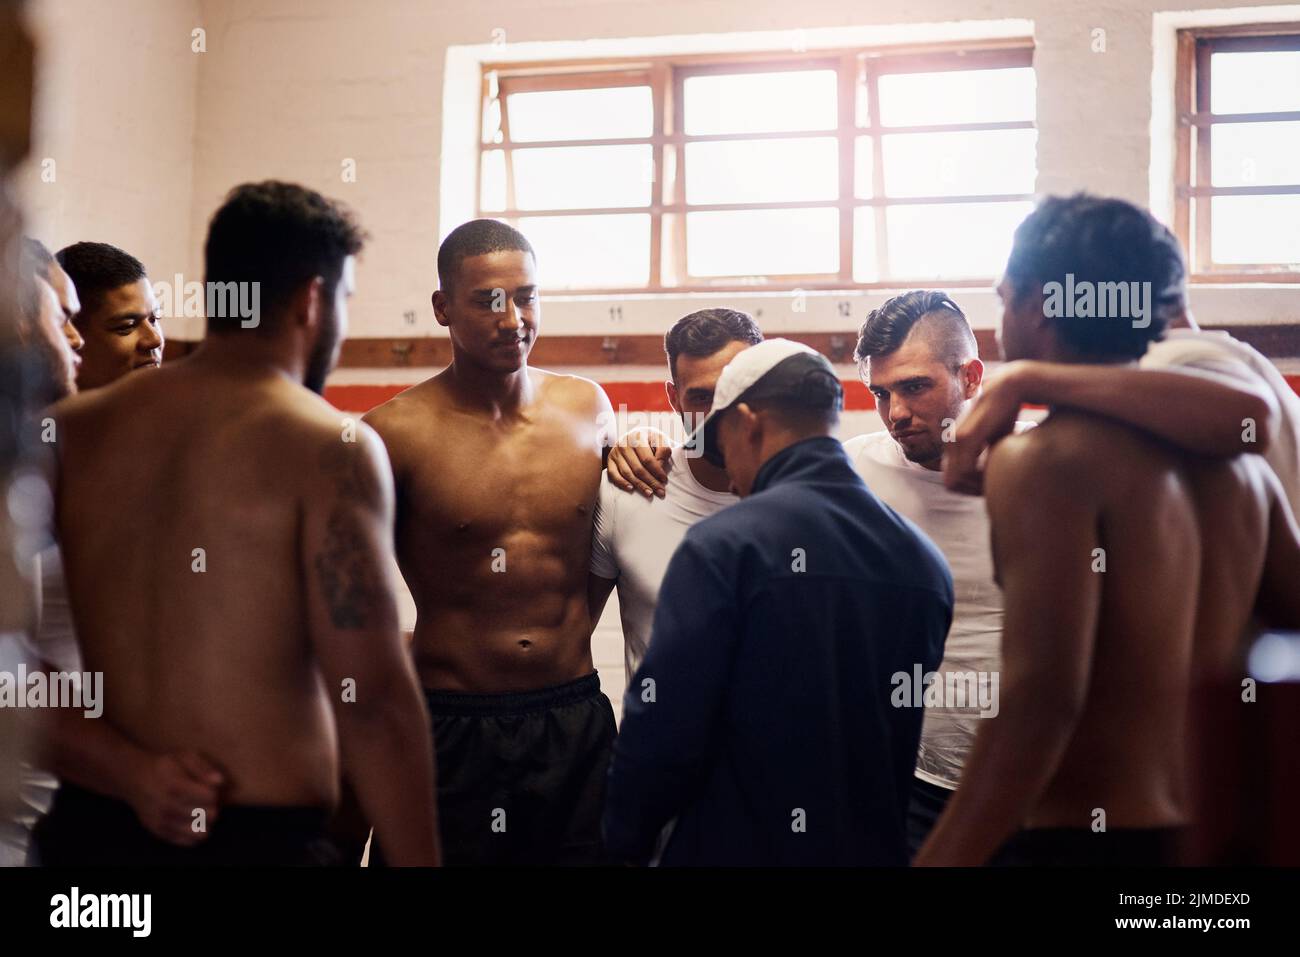 Forget sports team, theyre a family. a rugby coach addressing his team players in a locker room. Stock Photo